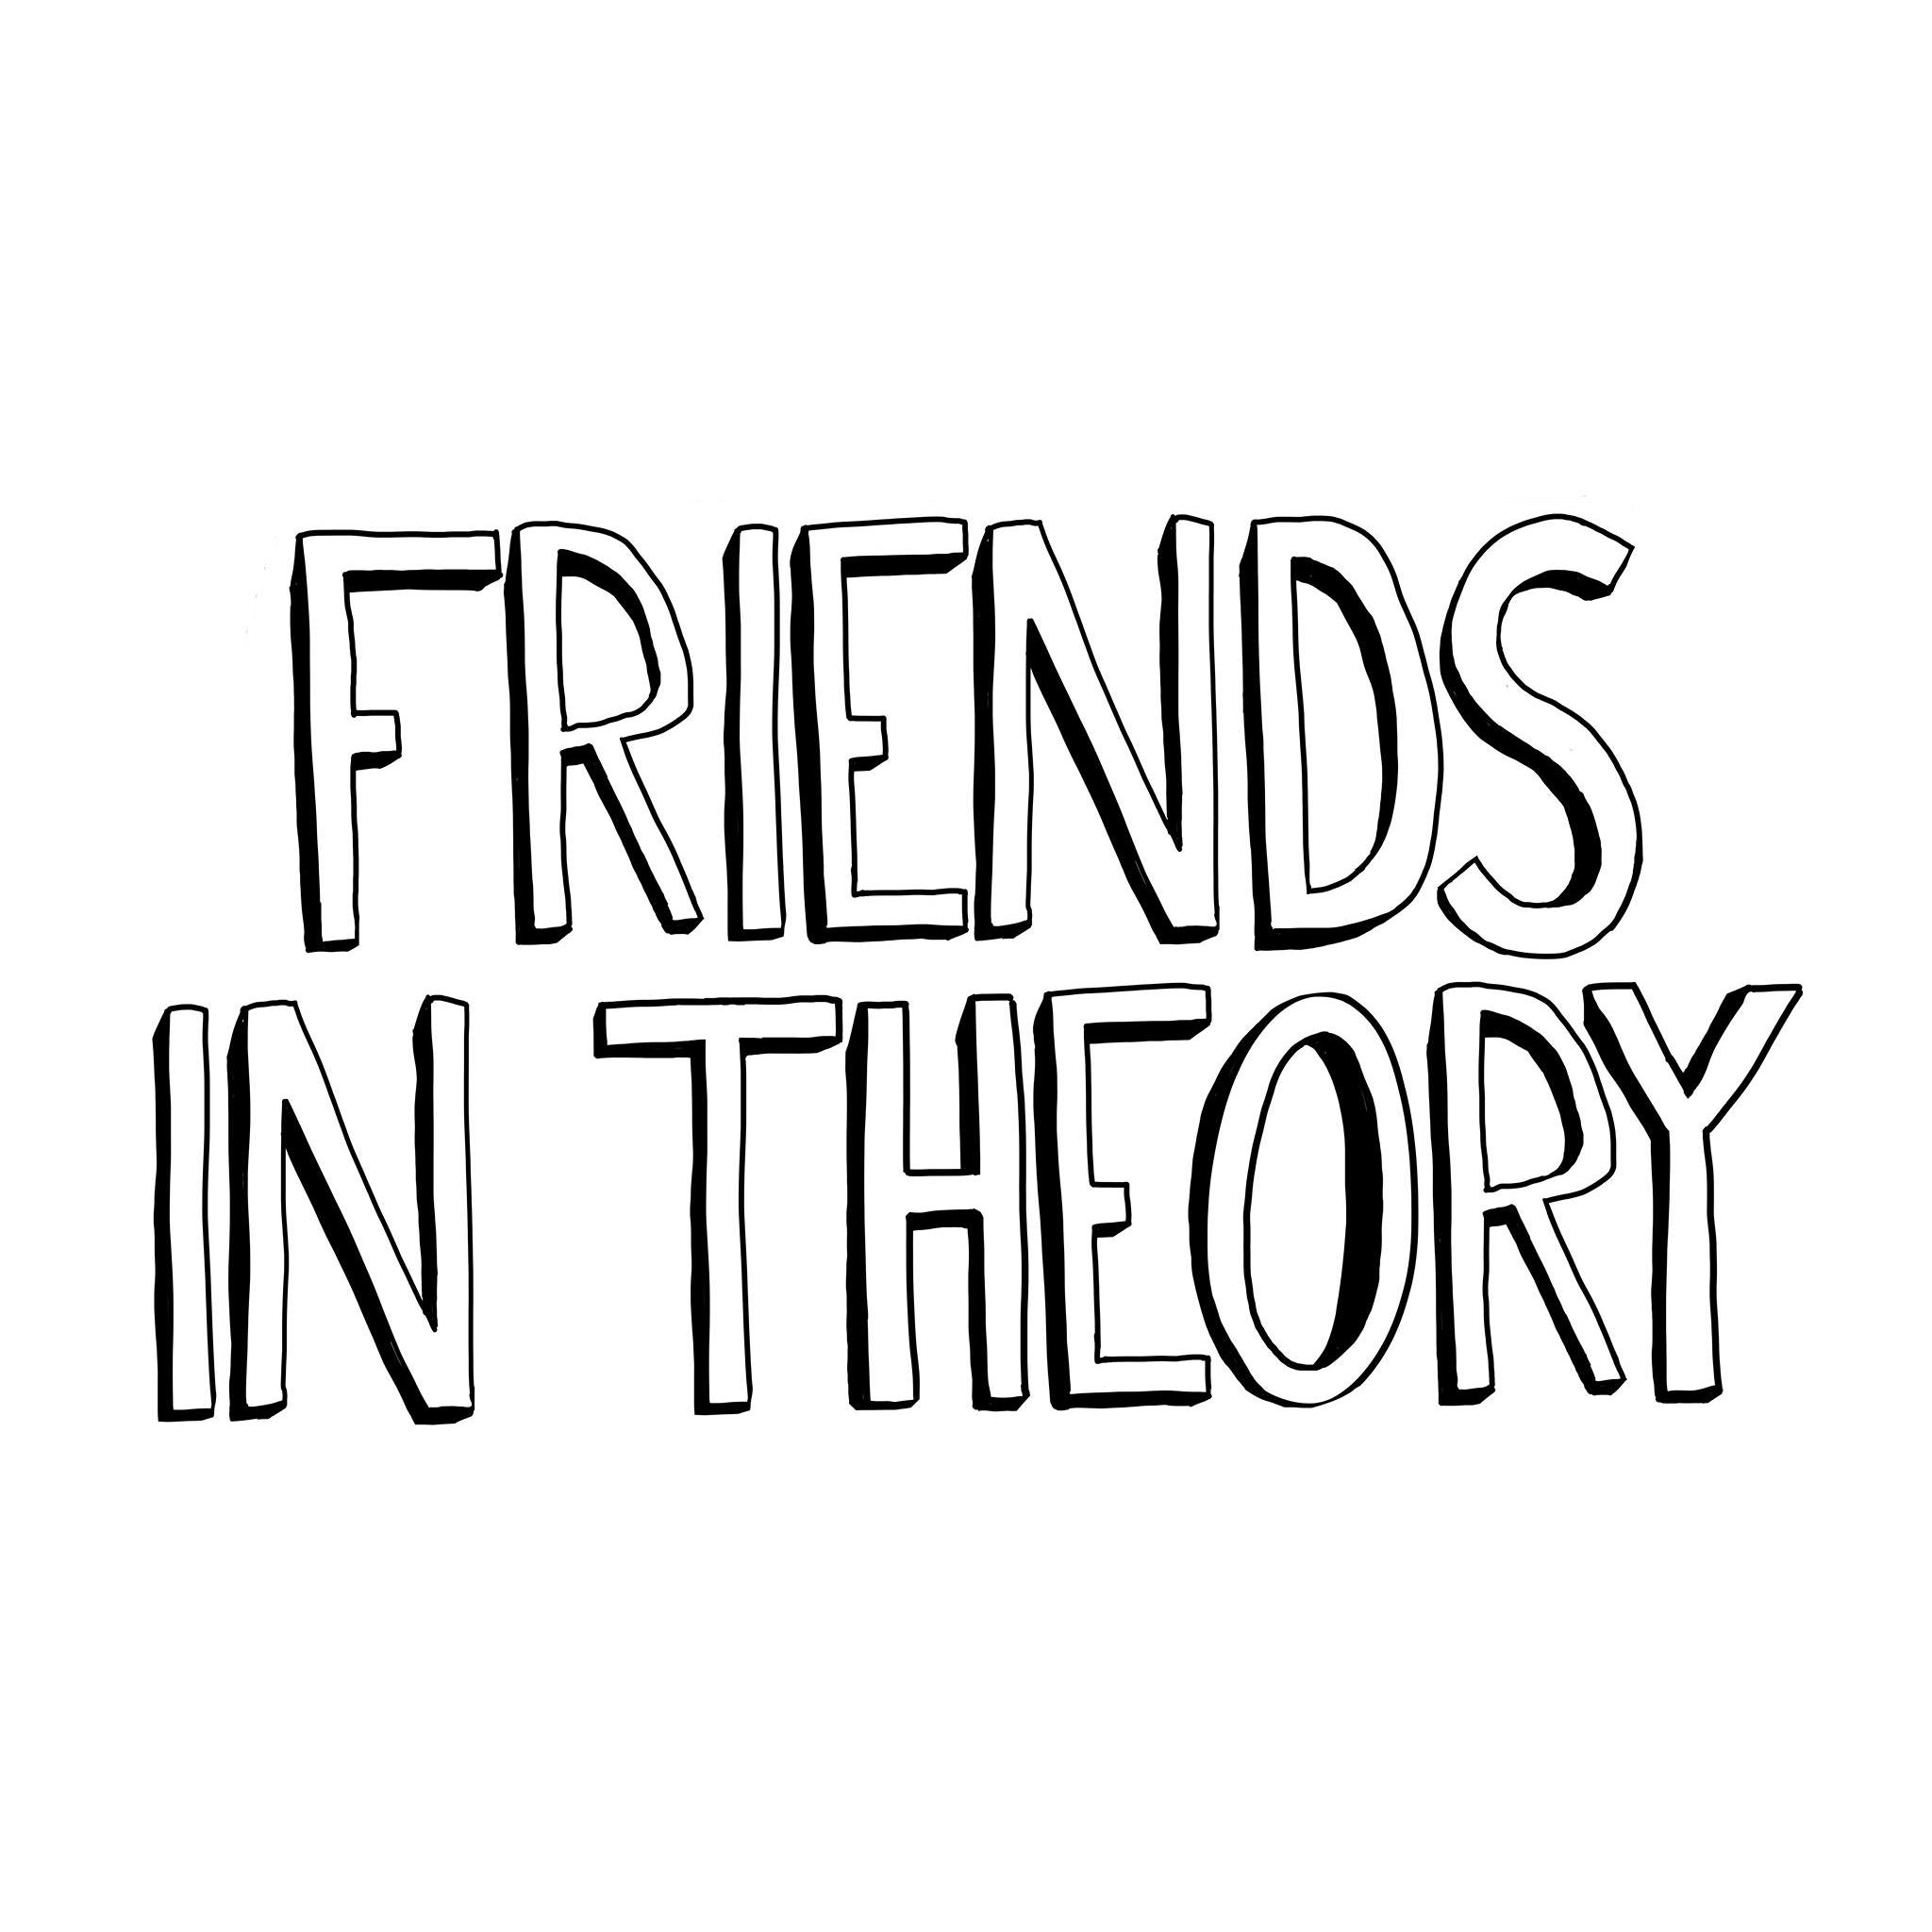 Friends In Theory